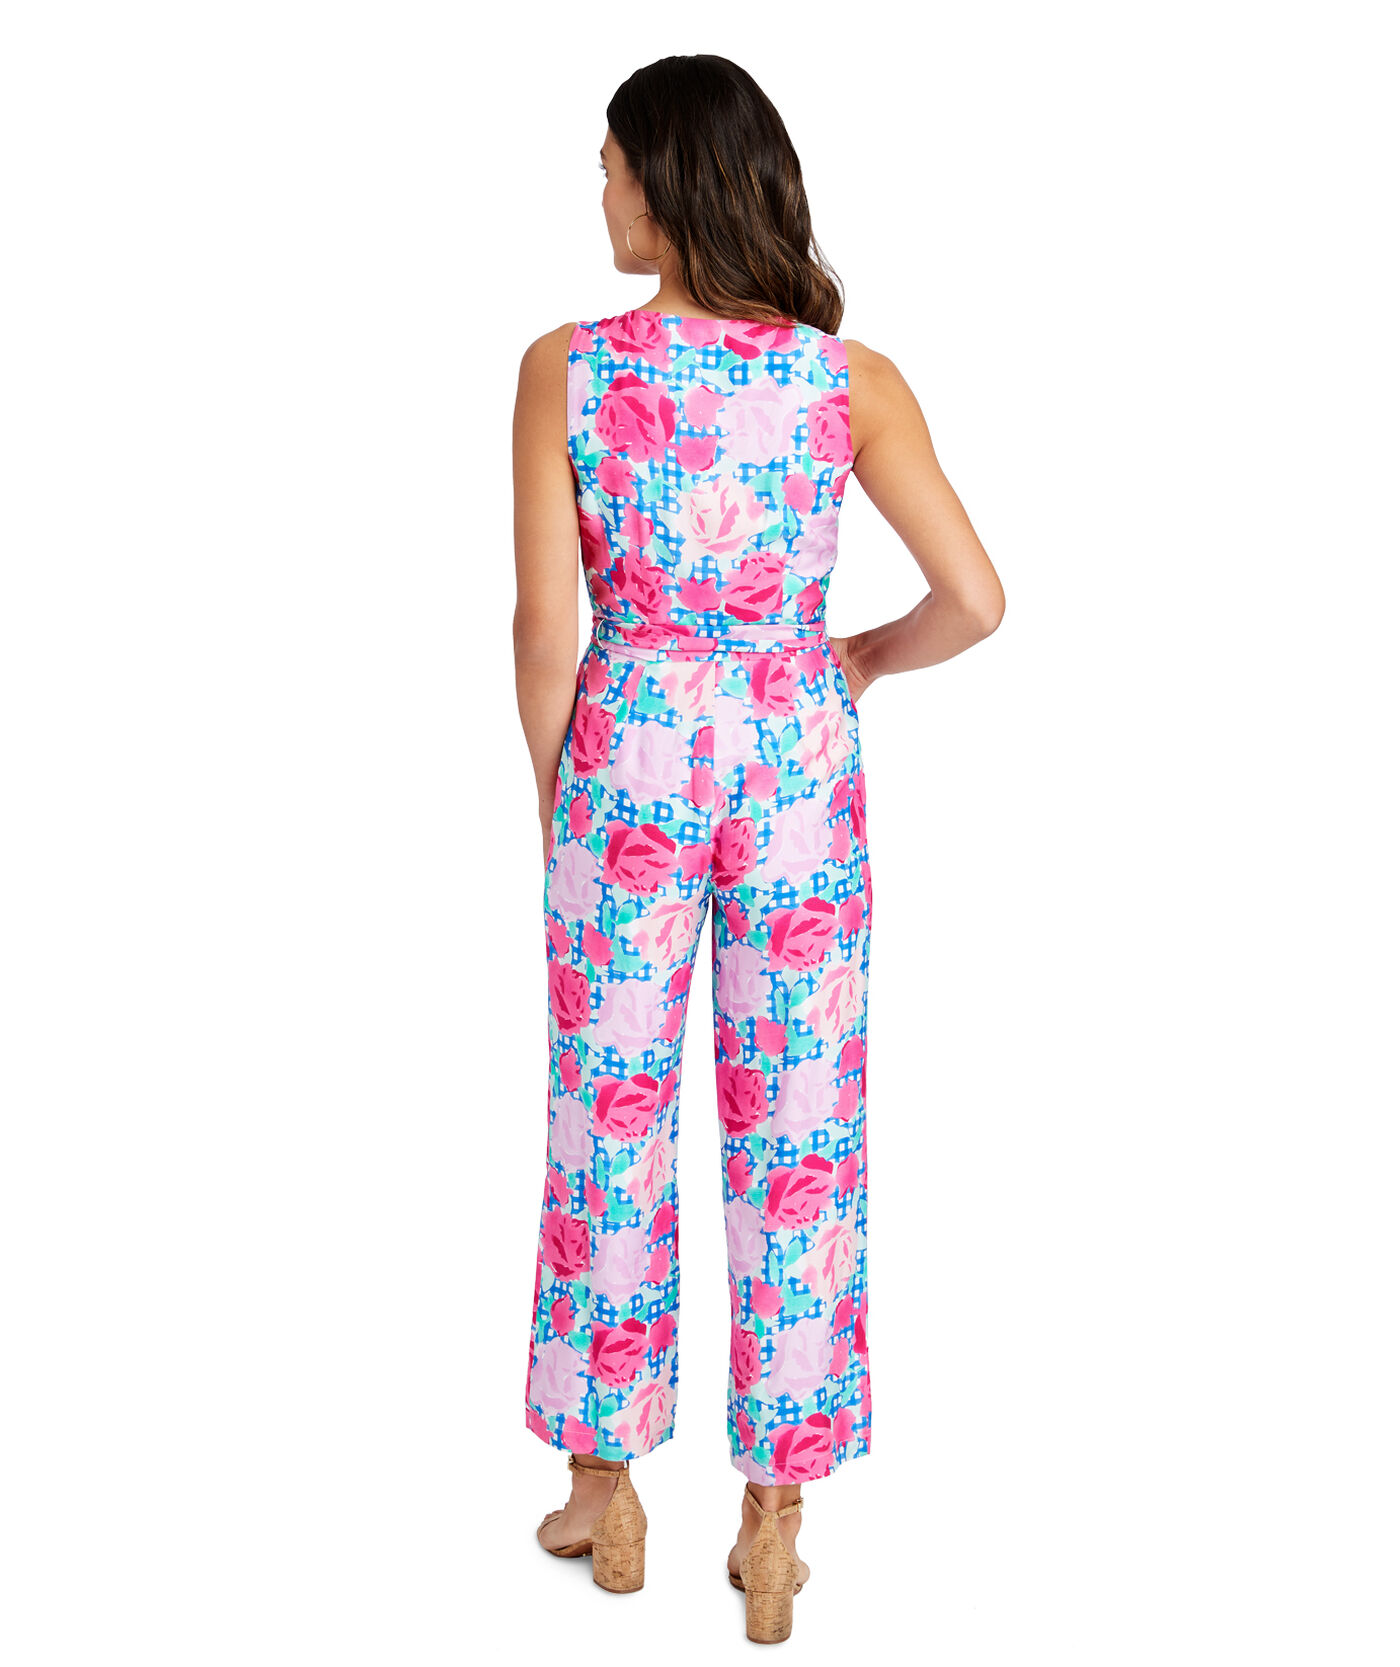 Shop Run For The Roses Sleeveless Jumpsuit at vineyard vines